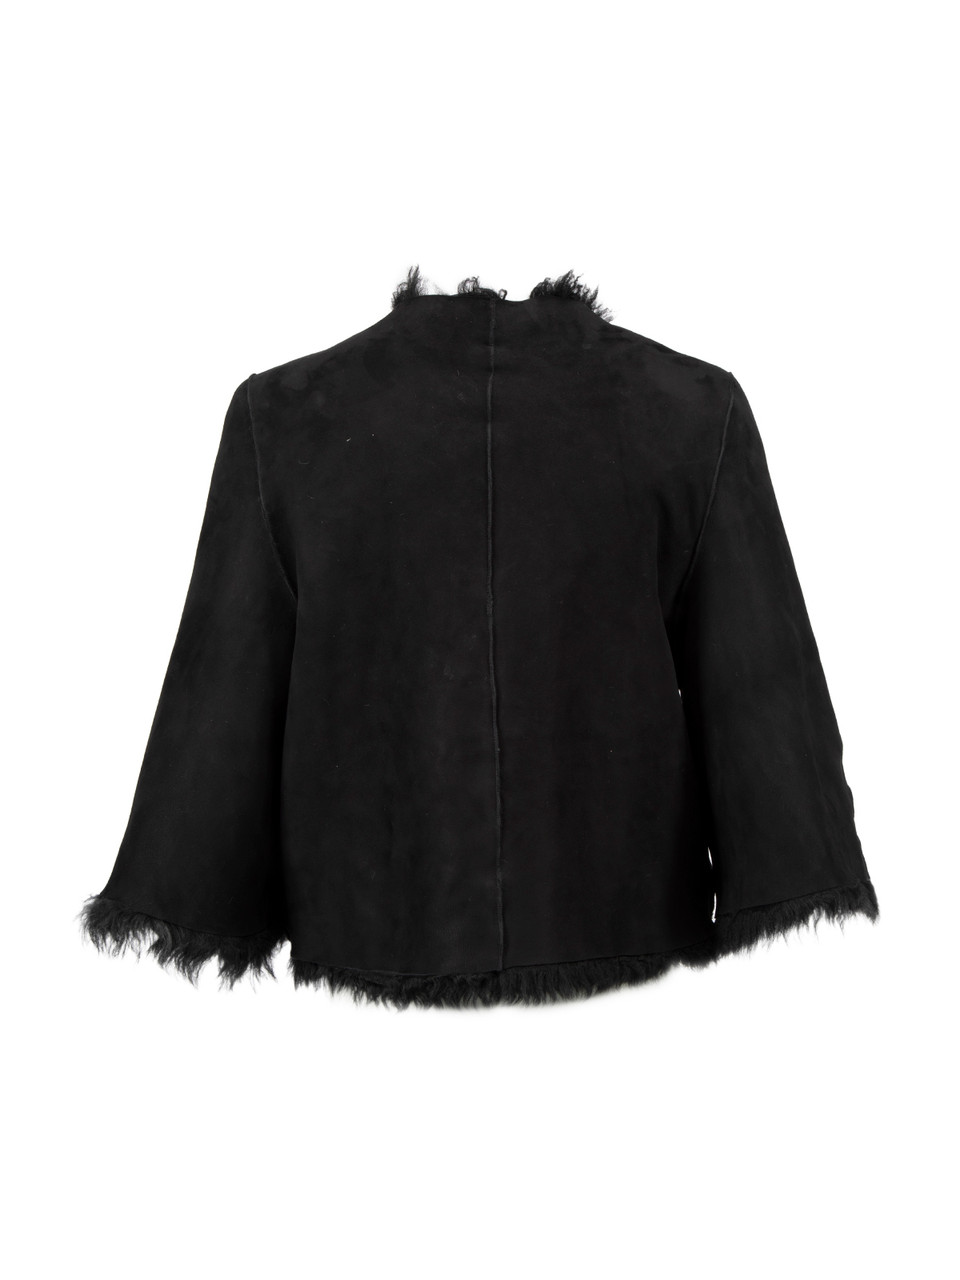 Red Valentino Garavani Floral Embroidery Fur Lined Cropped Jacket